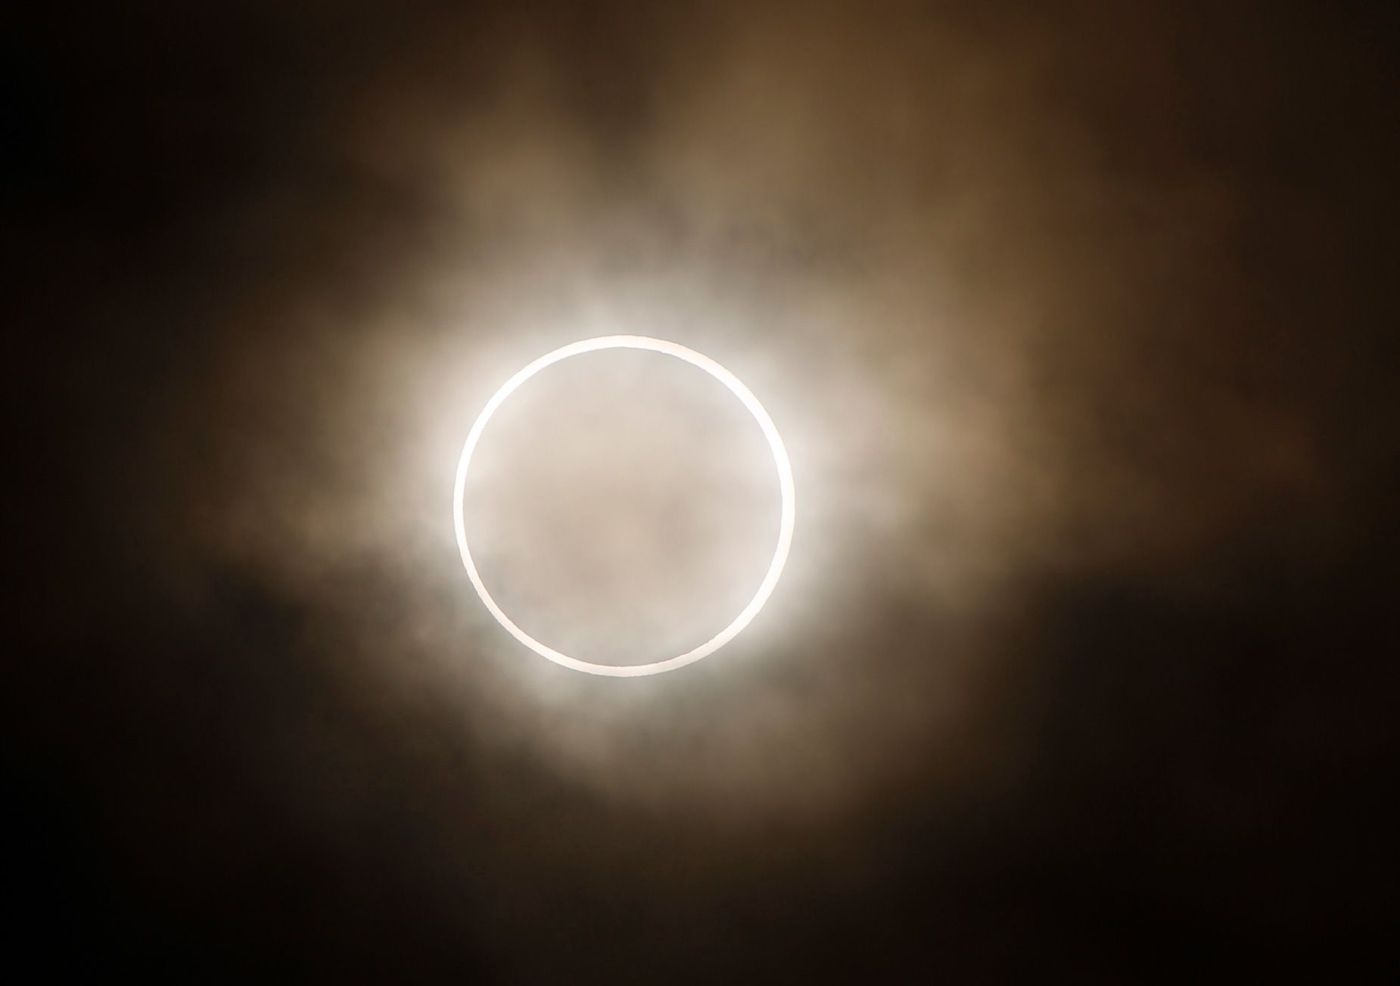 A ‘ring of fire’ solar eclipse is coming soon Here’s what you should know